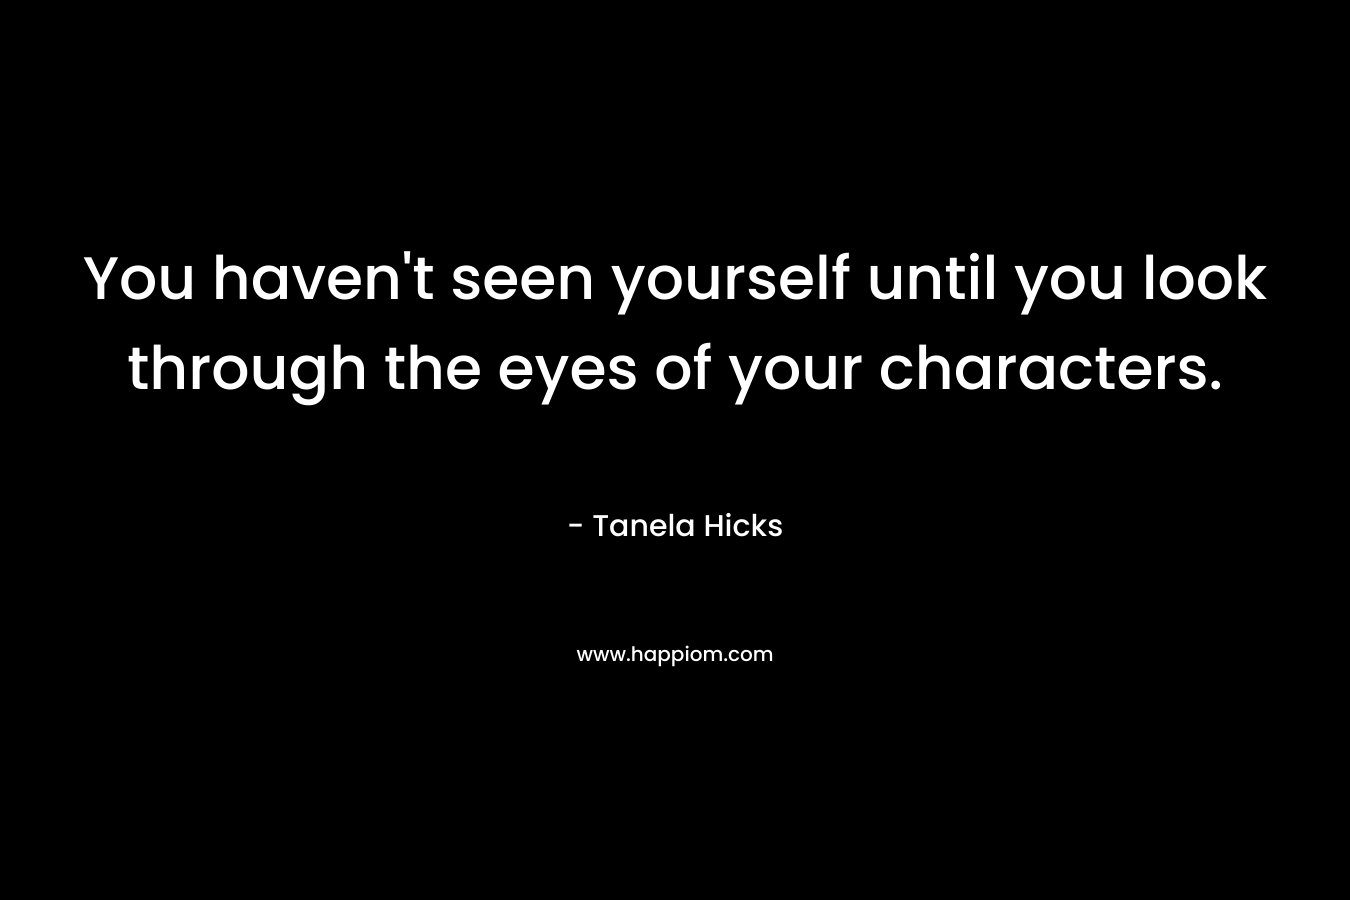 You haven’t seen yourself until you look through the eyes of your characters. – Tanela Hicks